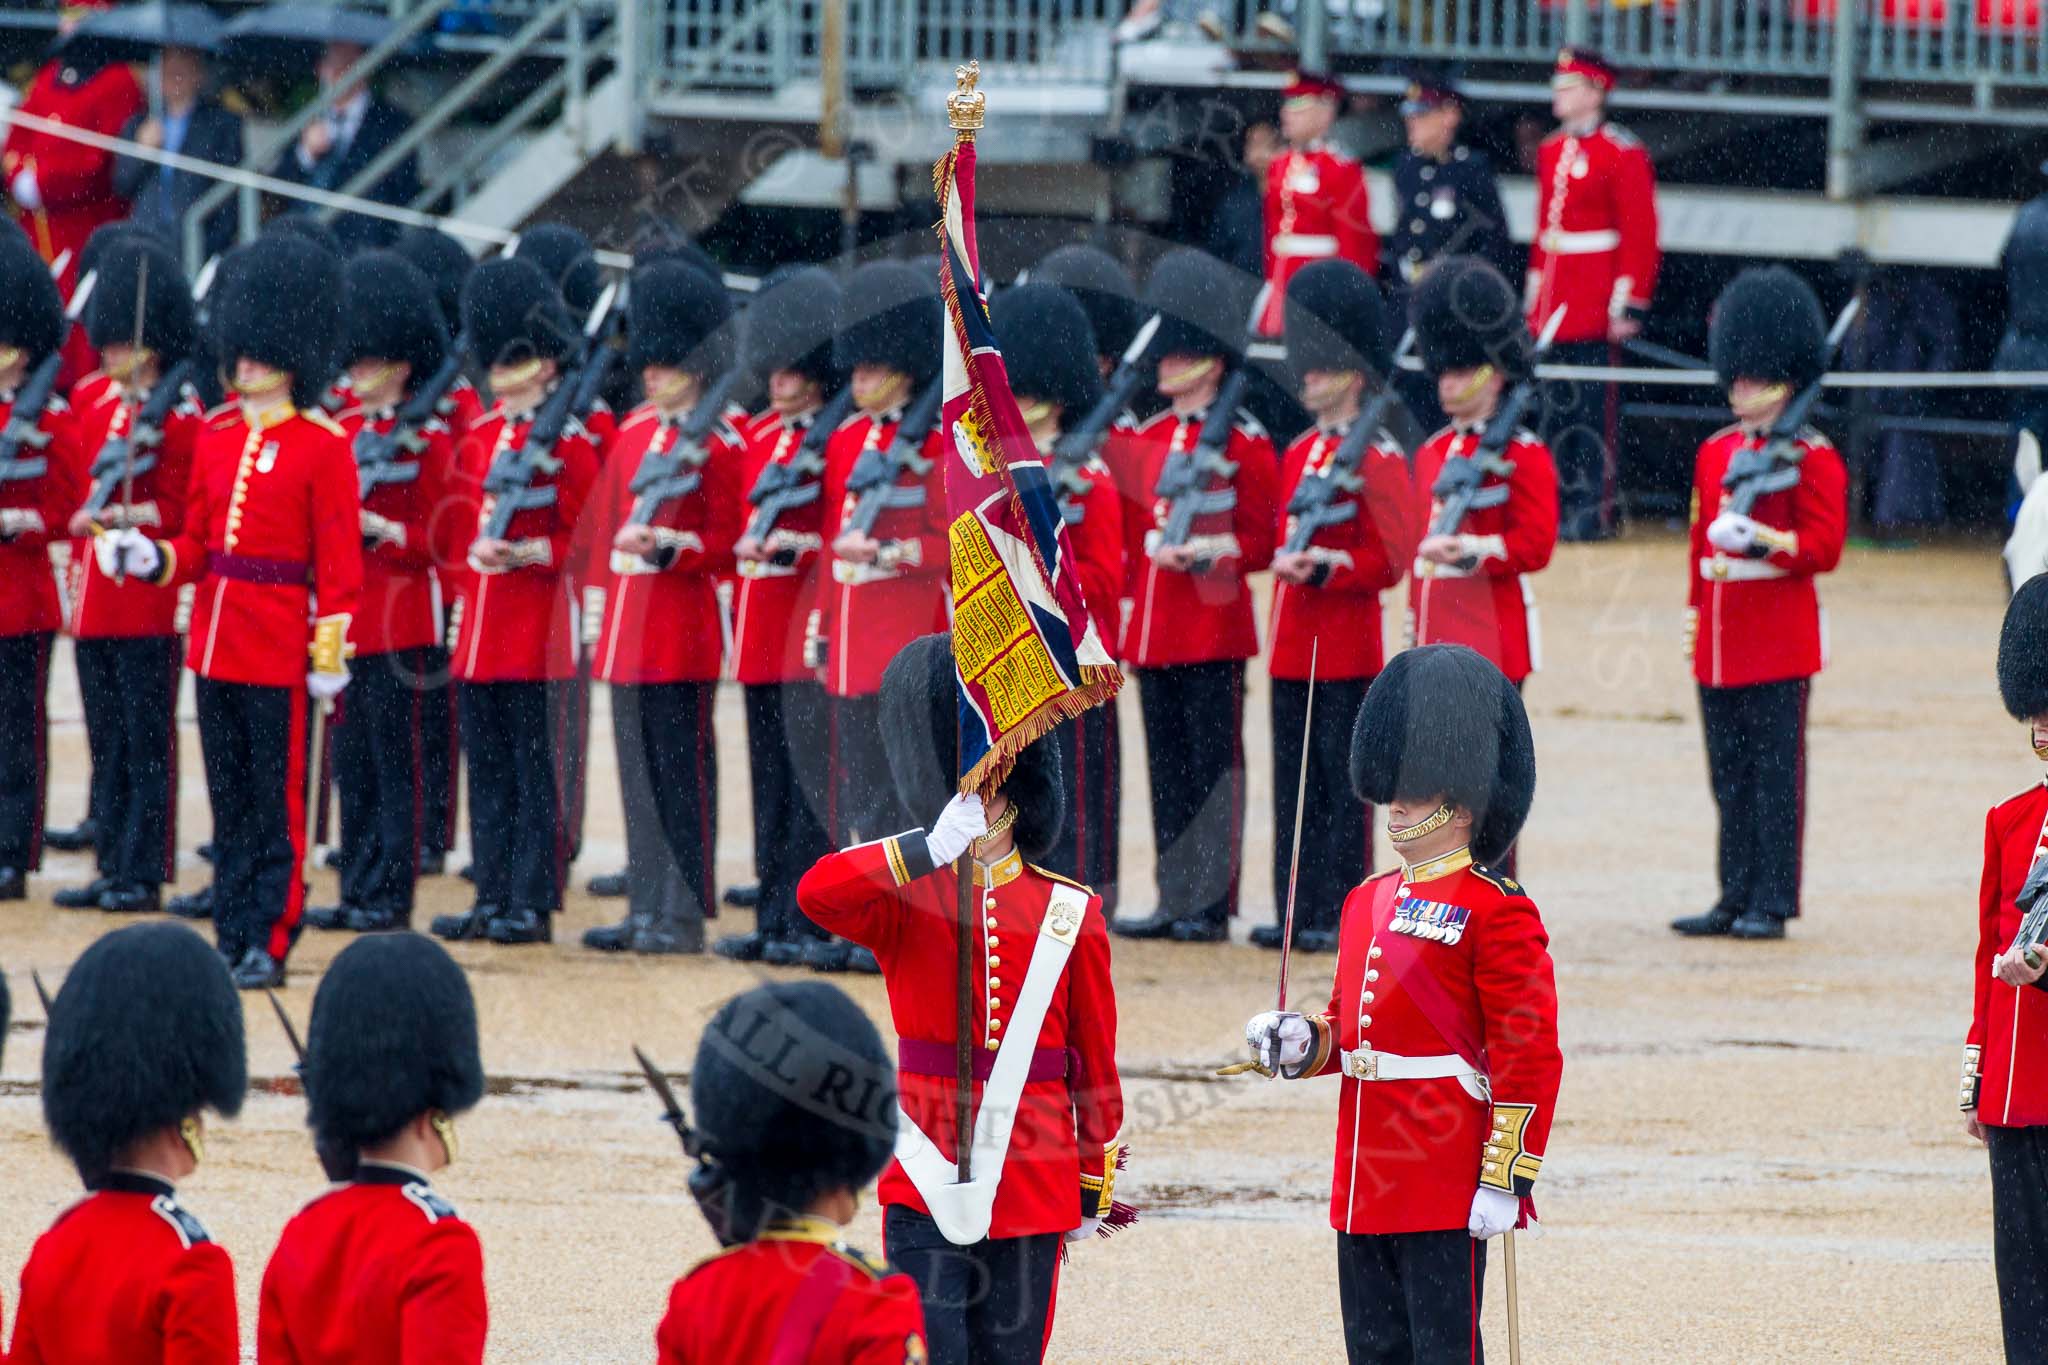 The Colonel's Review 2014.
Horse Guards Parade, Westminster,
London,

United Kingdom,
on 07 June 2014 at 11:19, image #400